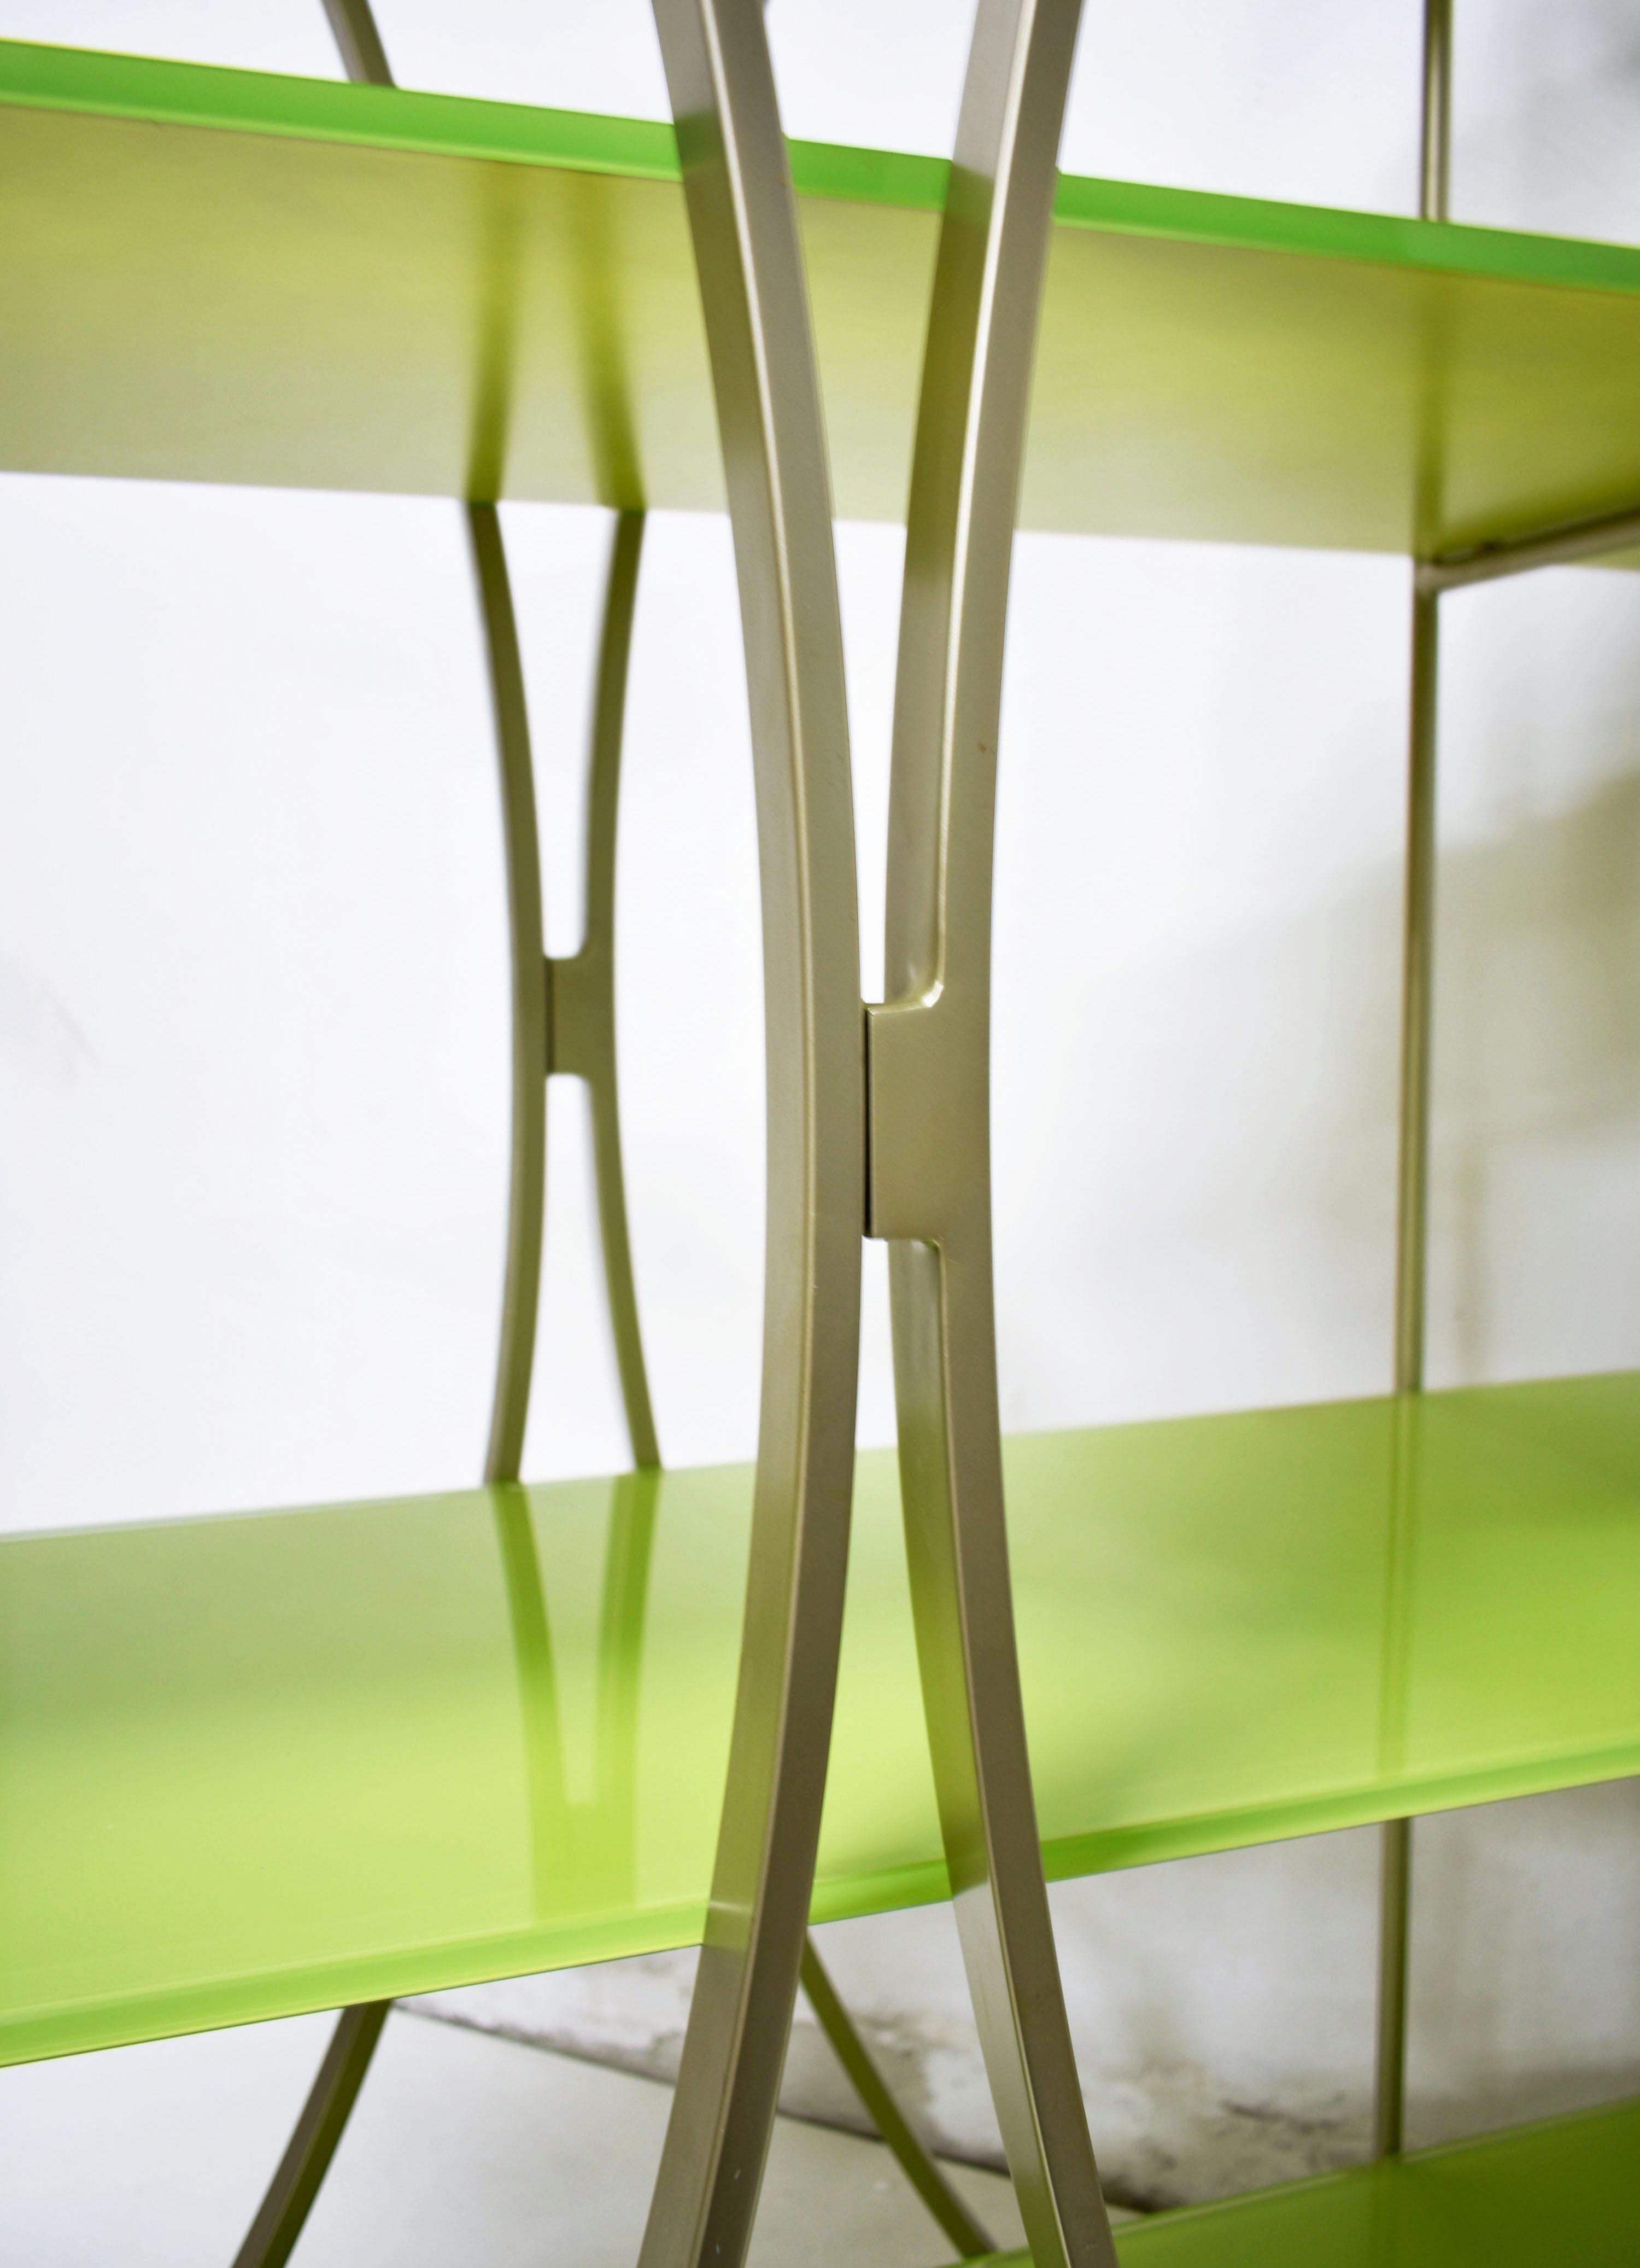 Italian postmodern bookshelves produced in the 1980s and 1990s by Tonin Casa, Italy 

The stunning postmodern sculptural form of the bookshelves features a minimalist metal structure supporting 4 heavy weighted shelves made of tempered glass